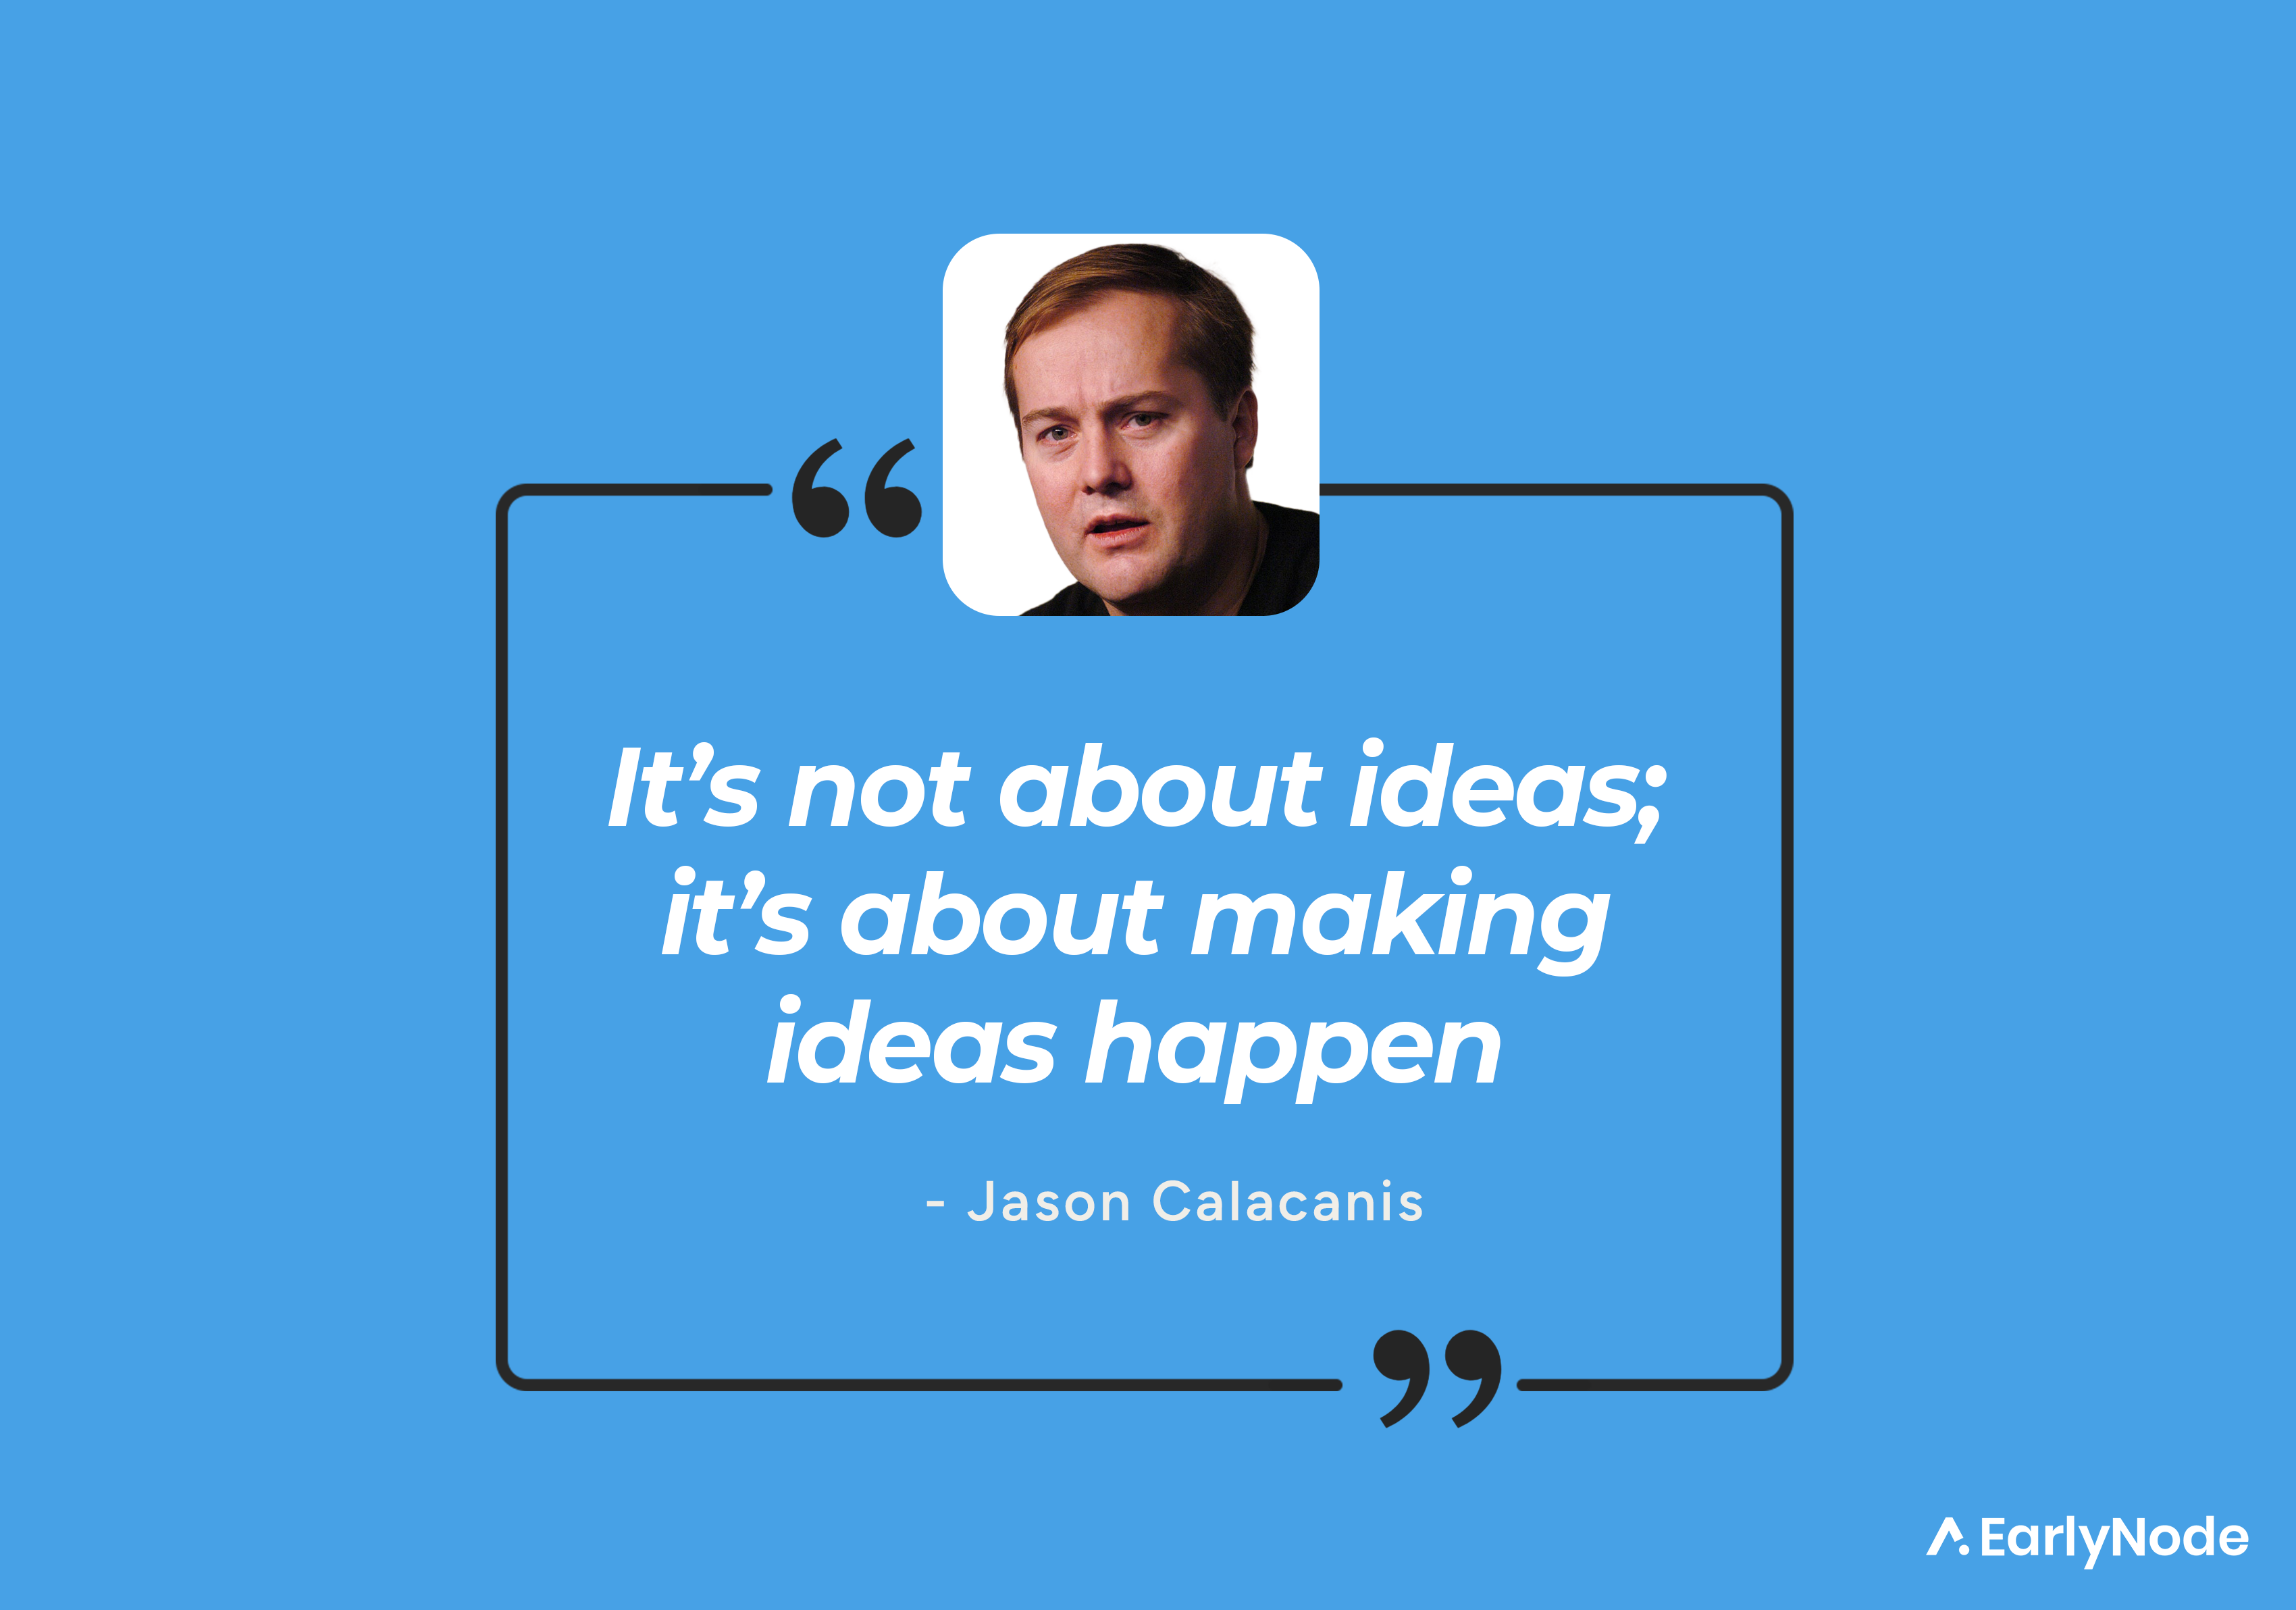 Top 10 Quotes by Jason Calacanis